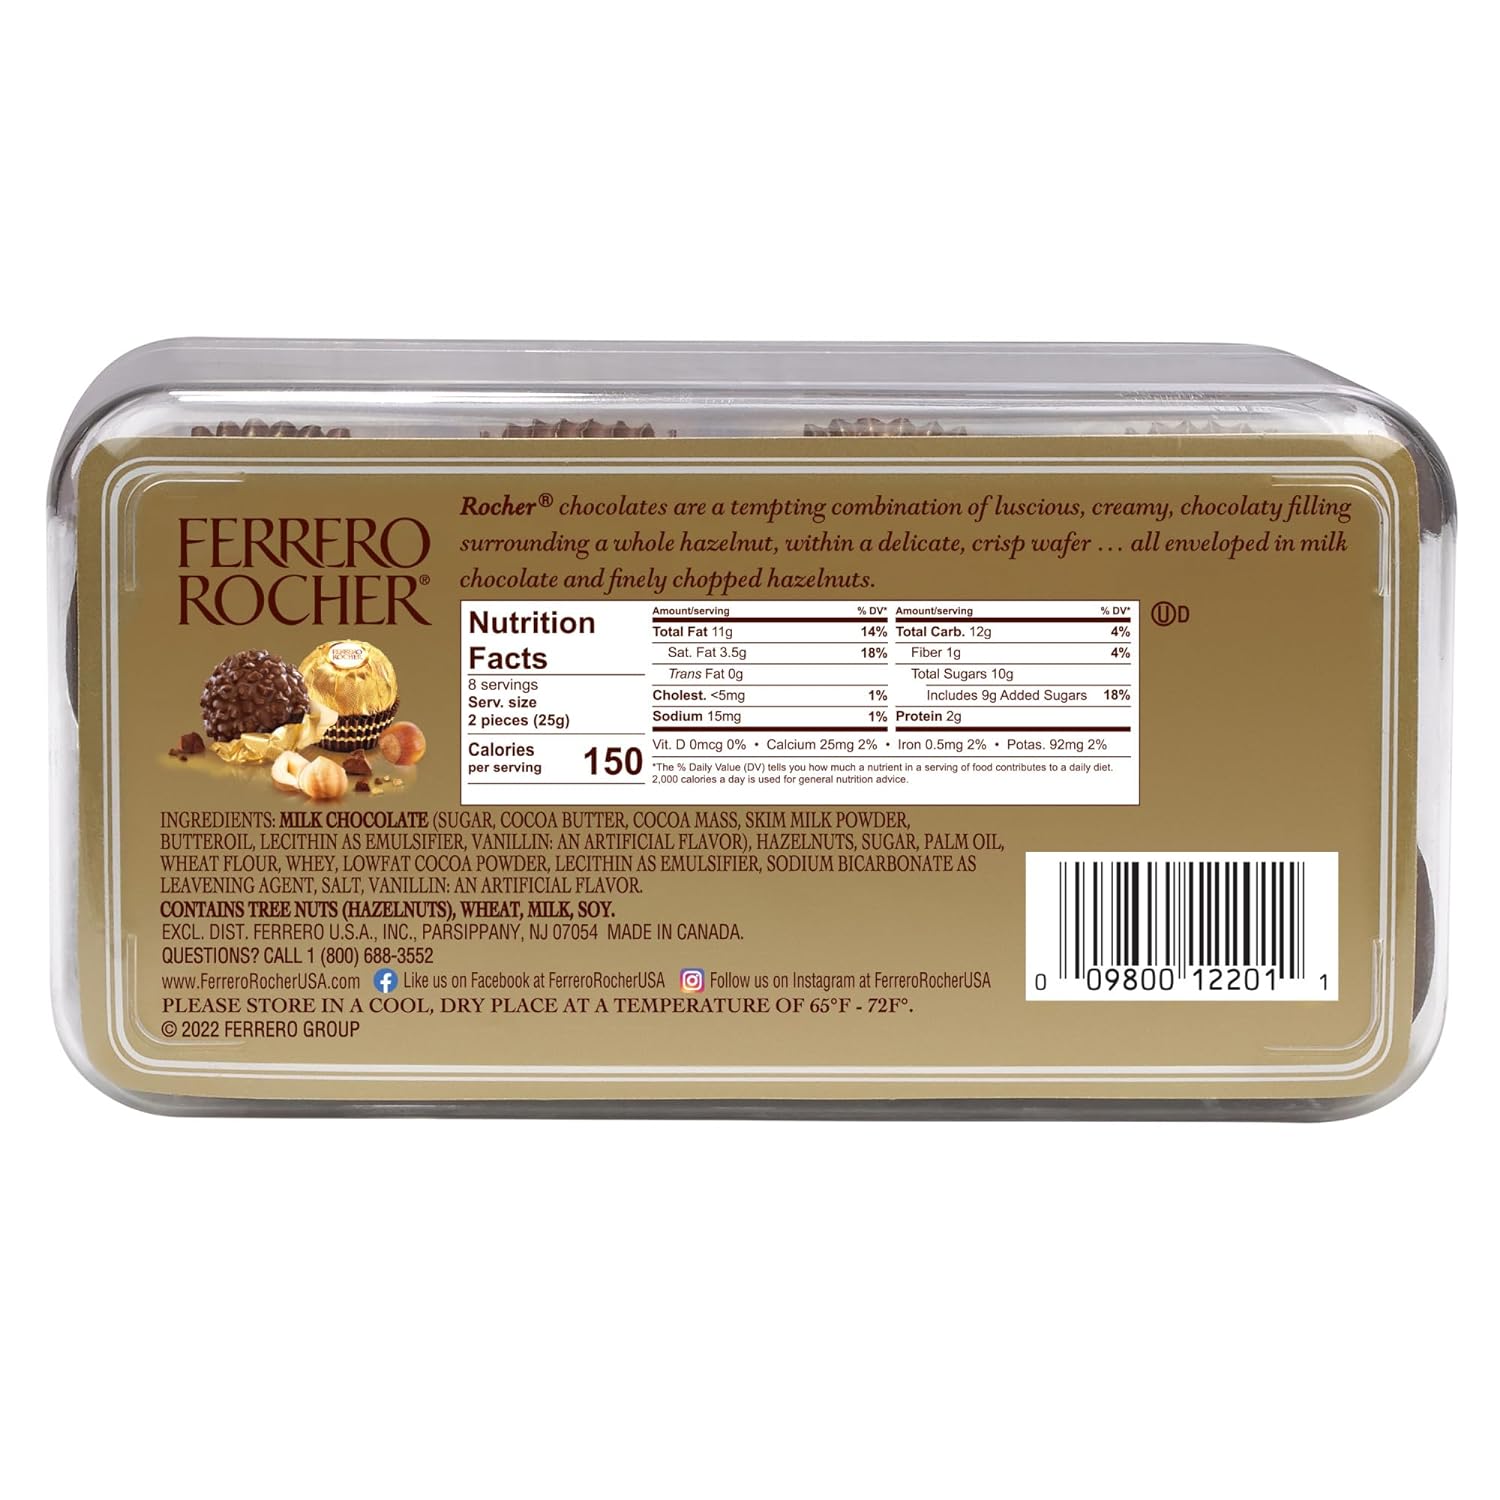 Ferrero Rocher, 16 Count, Premium Gourmet Milk Chocolate Hazelnut, Individually Wrapped Candy for Gifting, Great Easter Gift, 7 oz